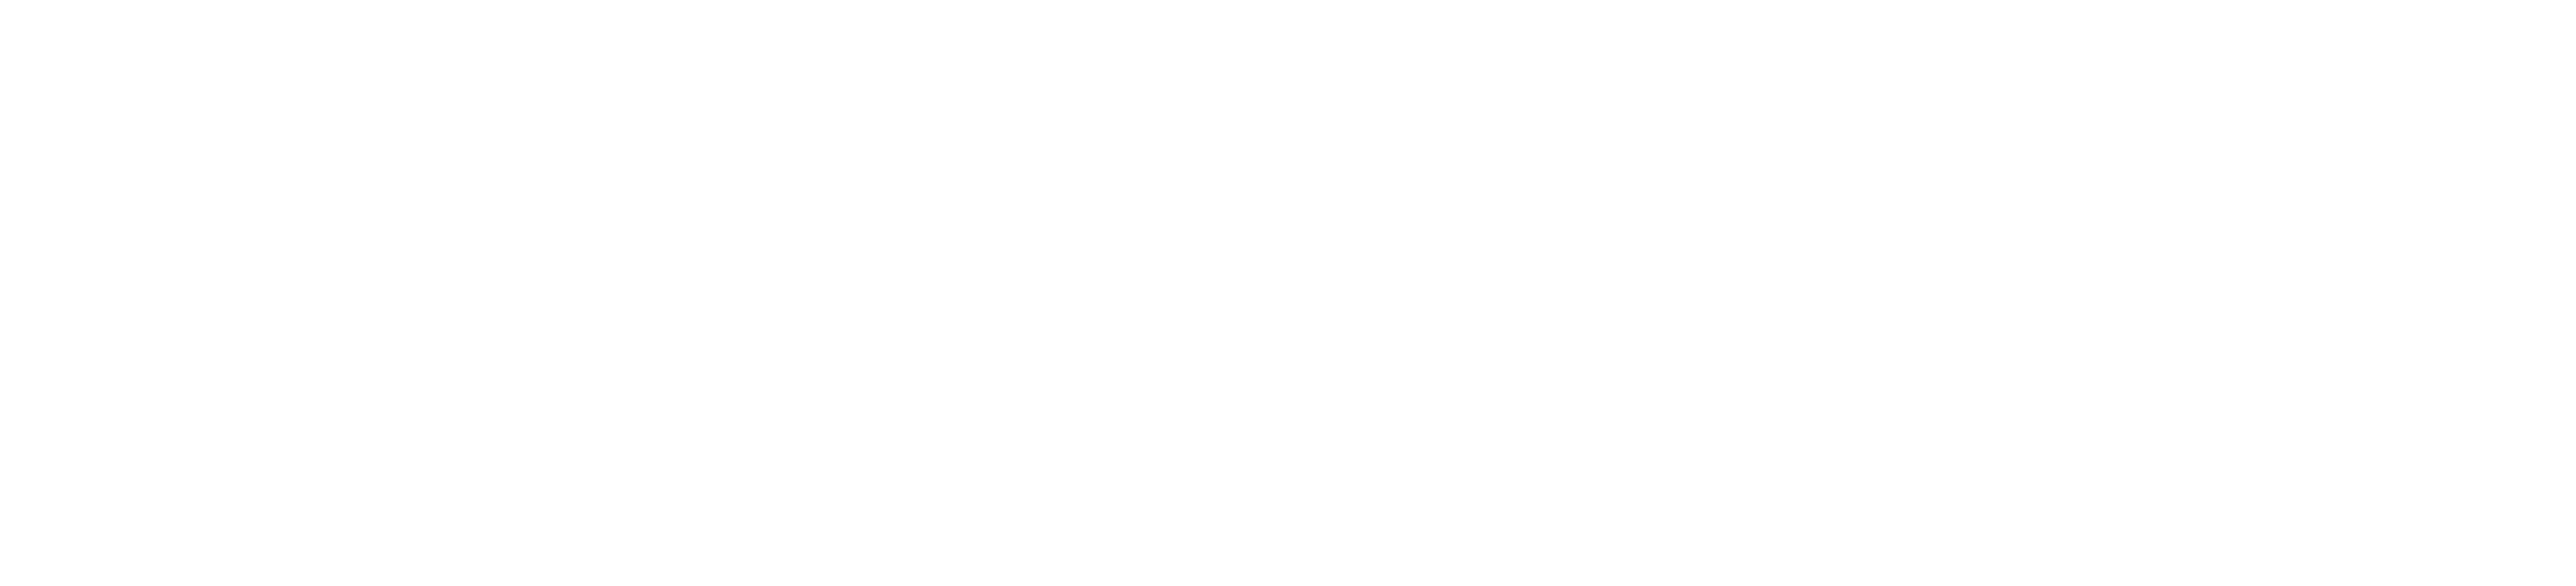 silicon valley business journal_logo
